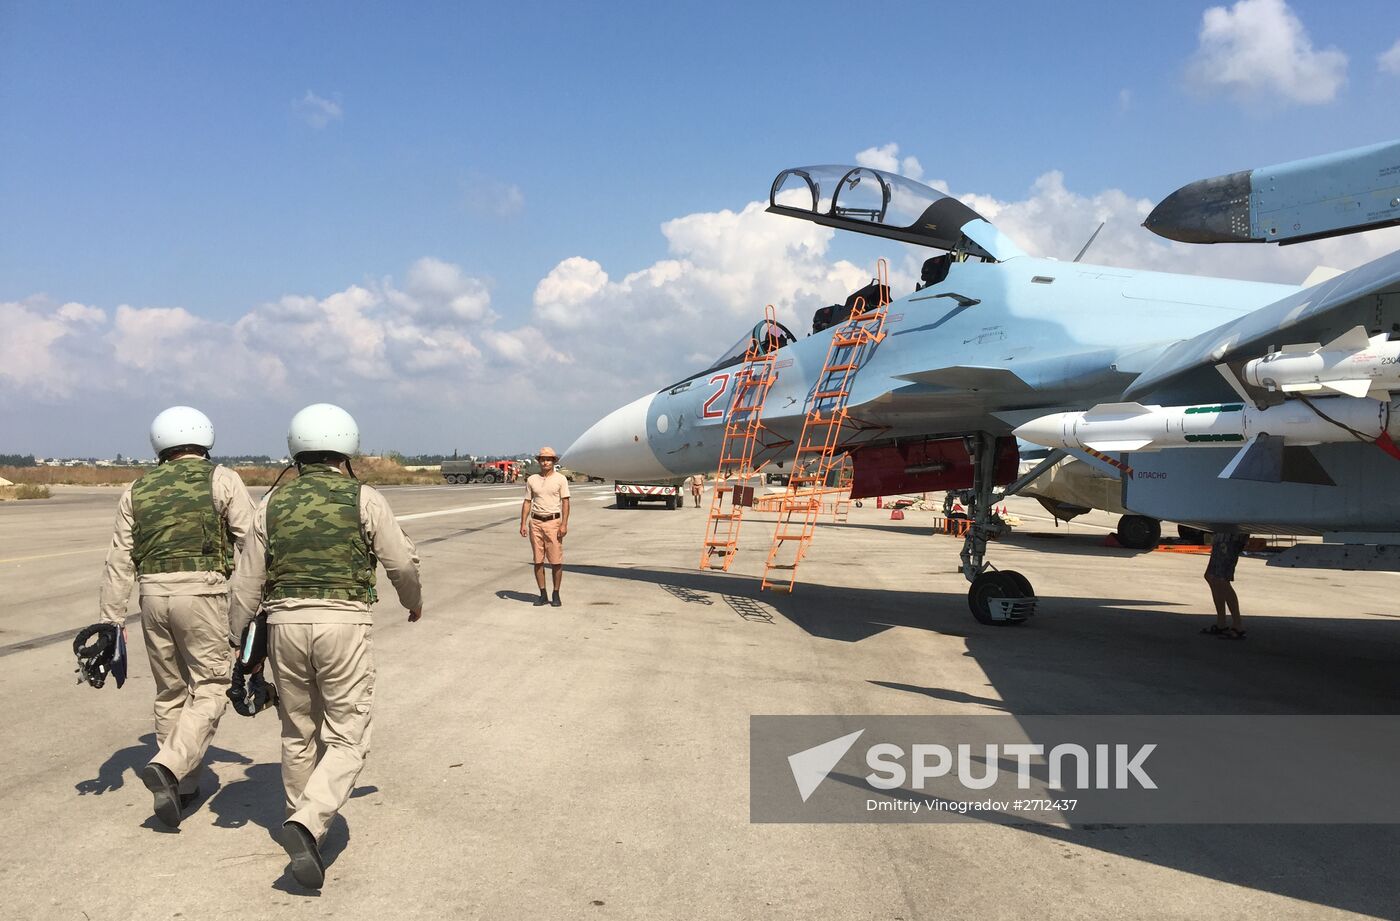 Russian tactical group seen at Hmeimim aerodrome in Syria